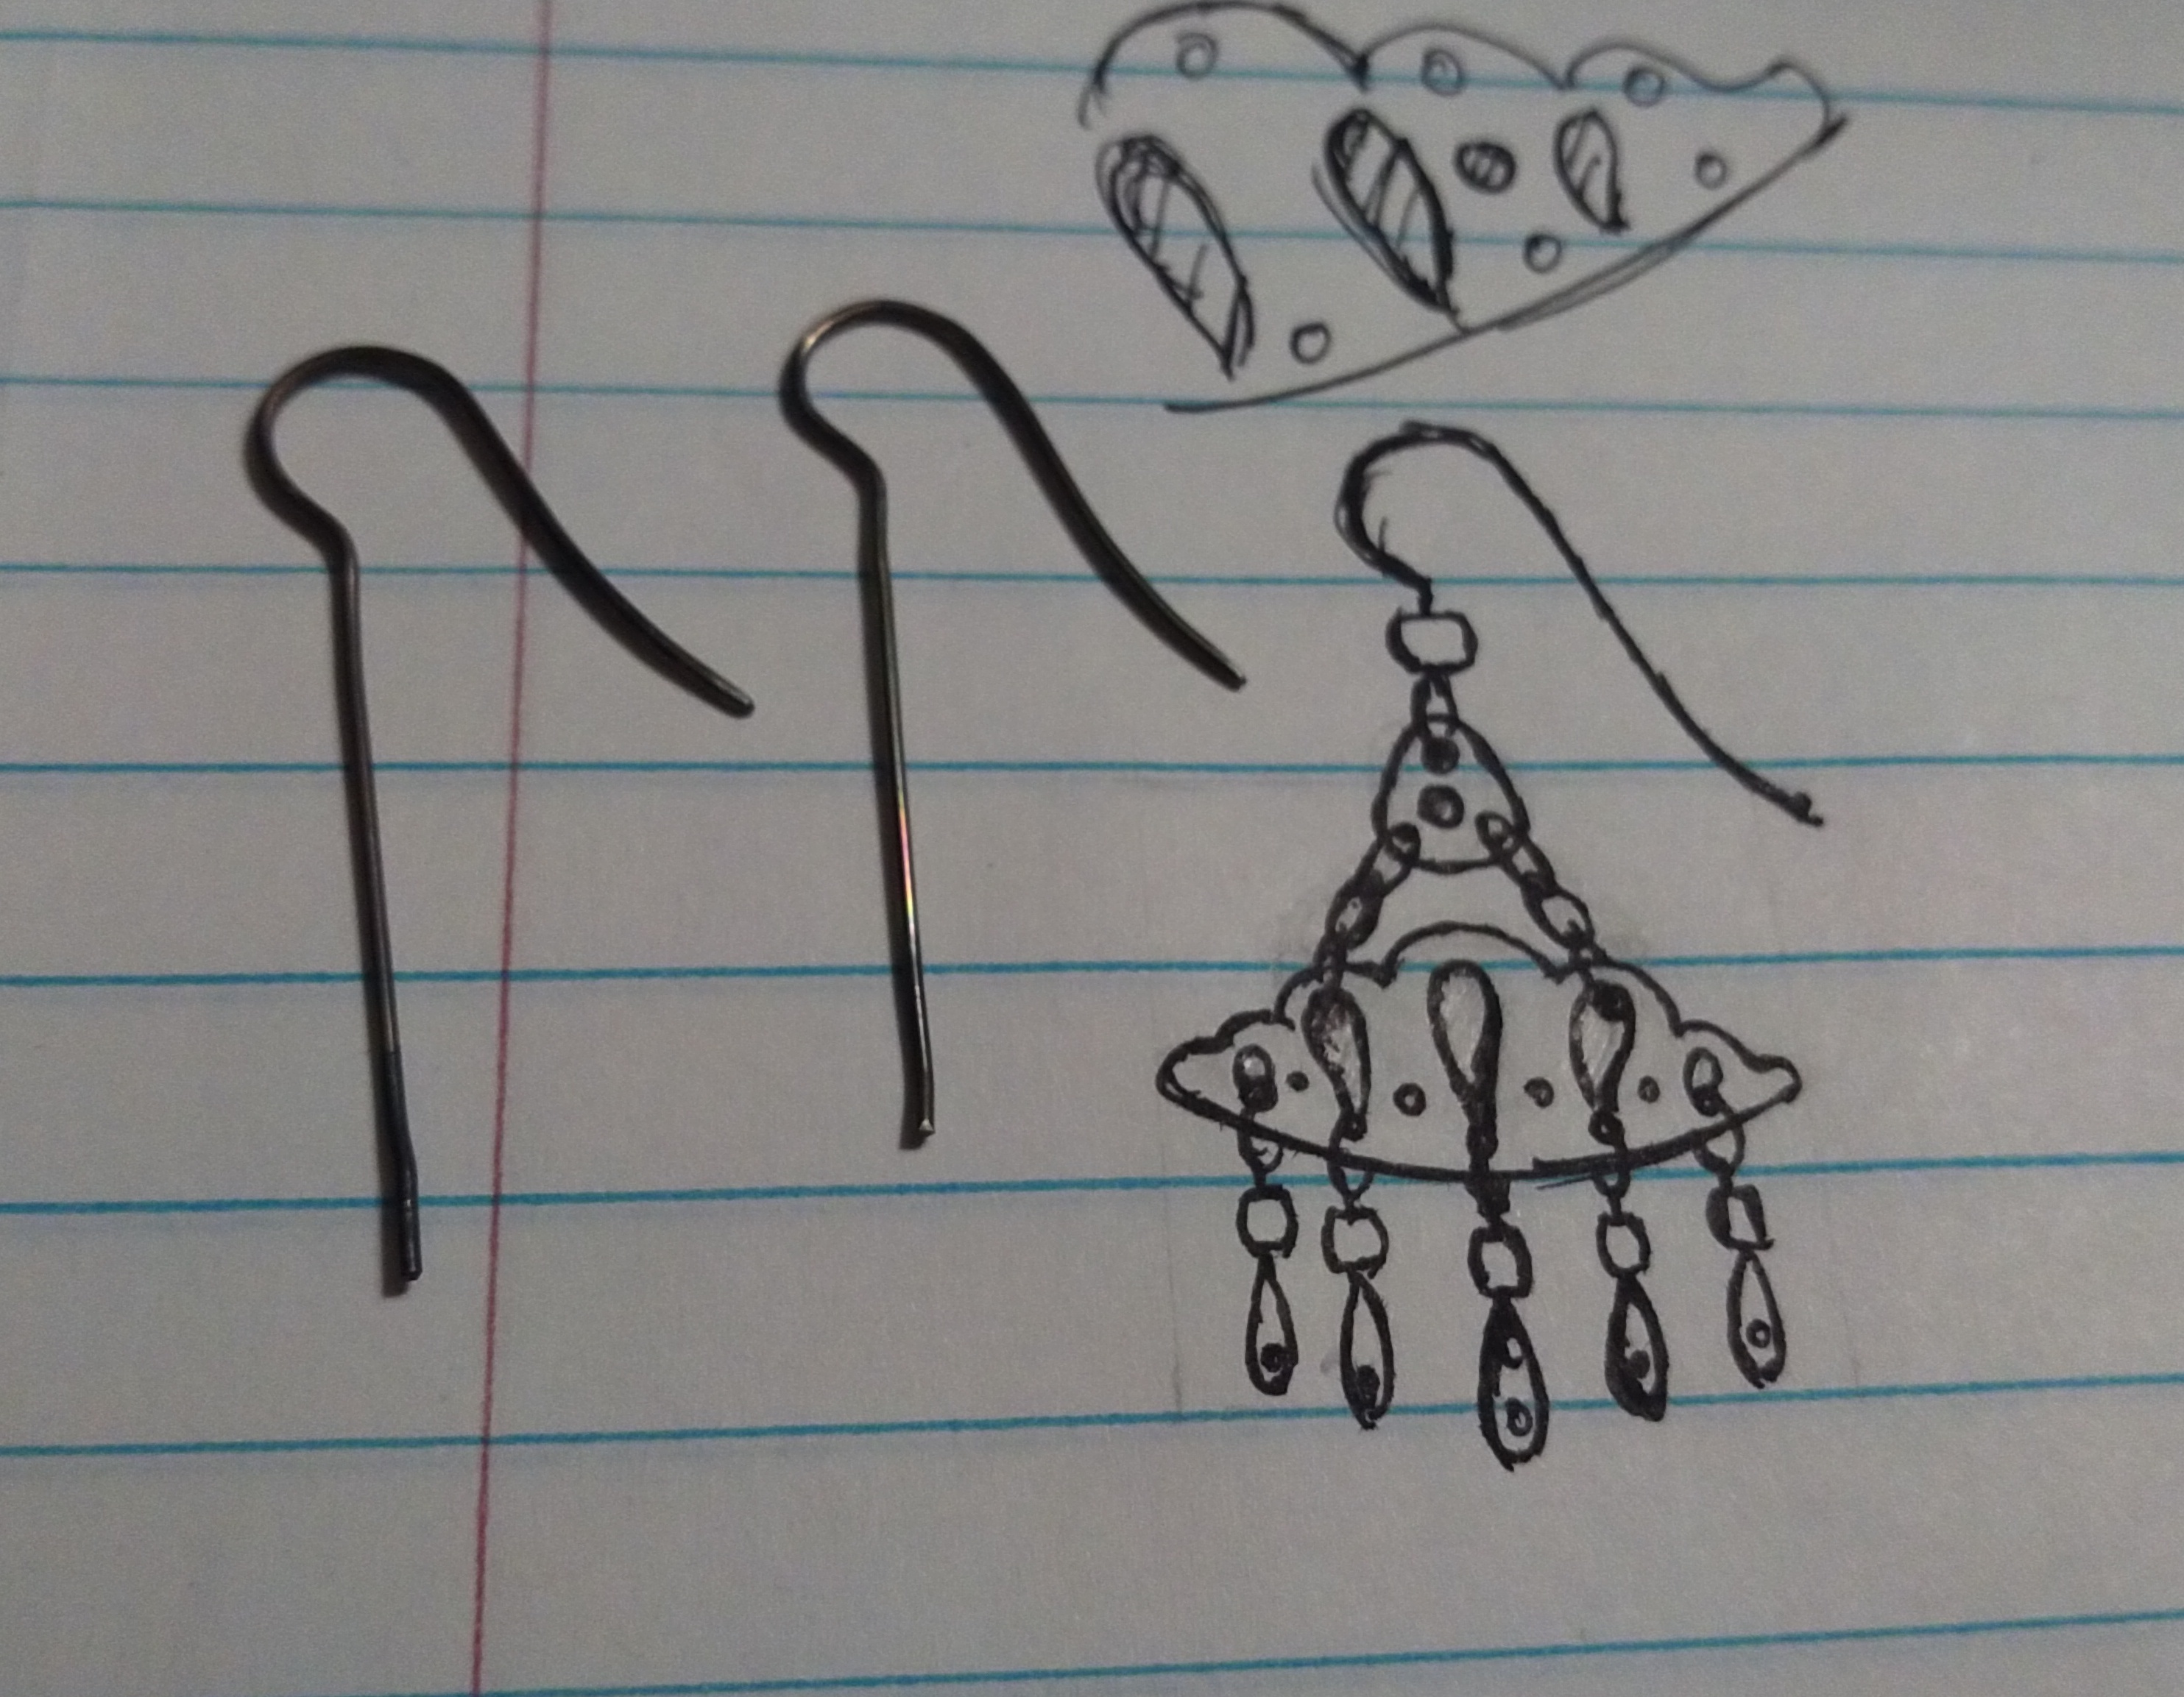 Concept drawing for a pair of pendant earrings shaped like clouds with raindrops. Sitting on the page is a set of partially bent earring hooks.